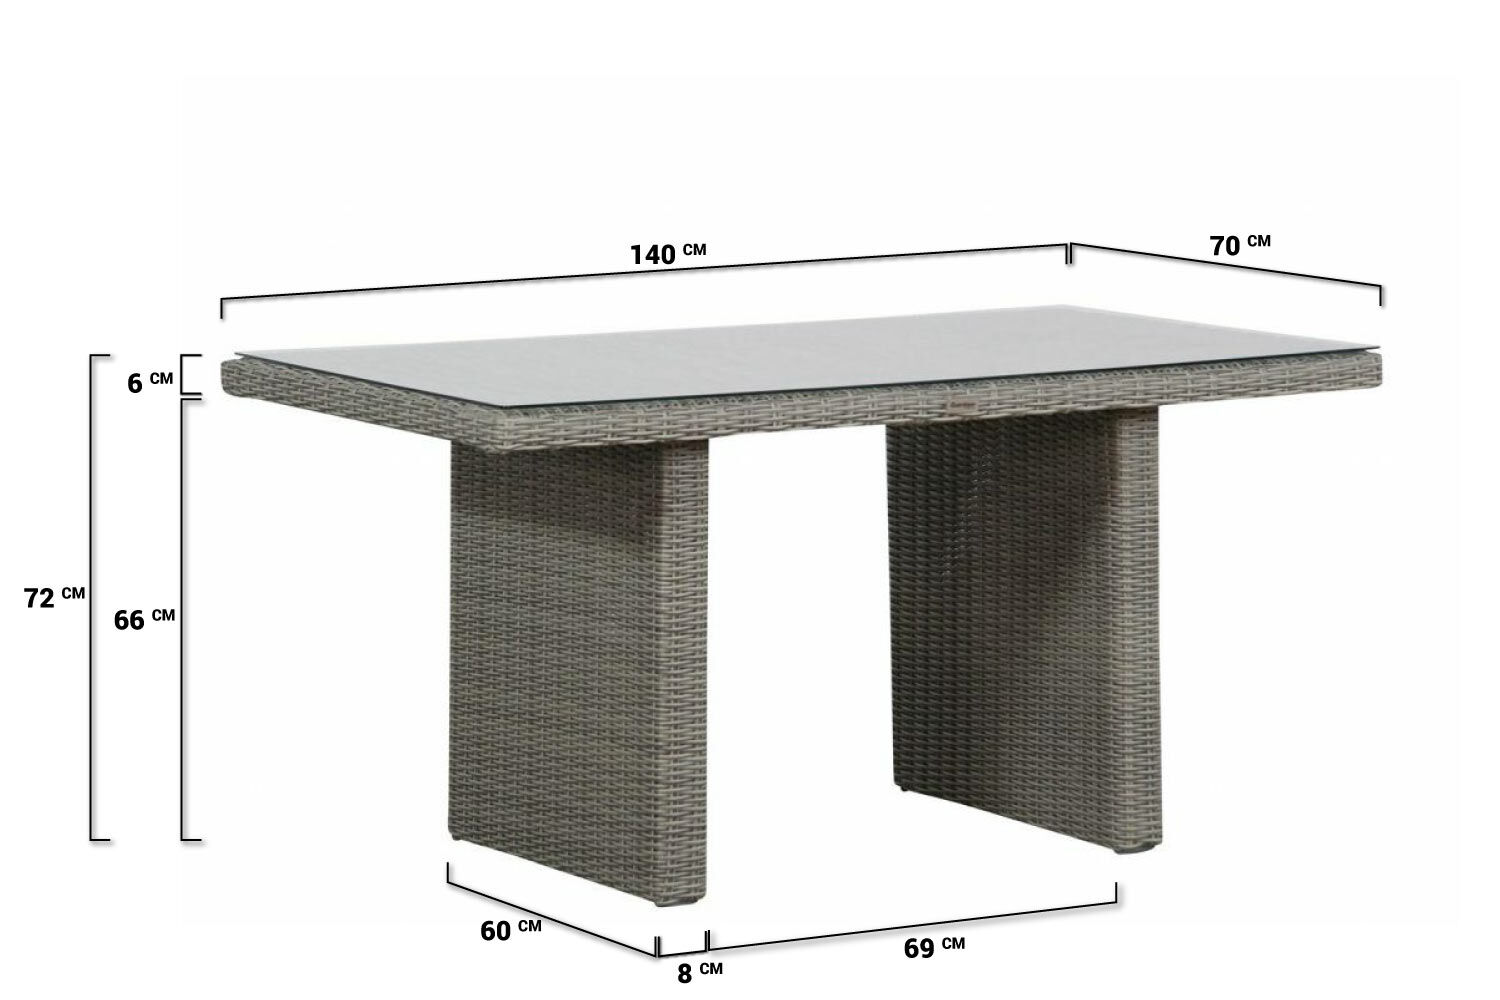 Collections Wilson lounge/dining 140 70 cm - Tuinmeubelshop.nl